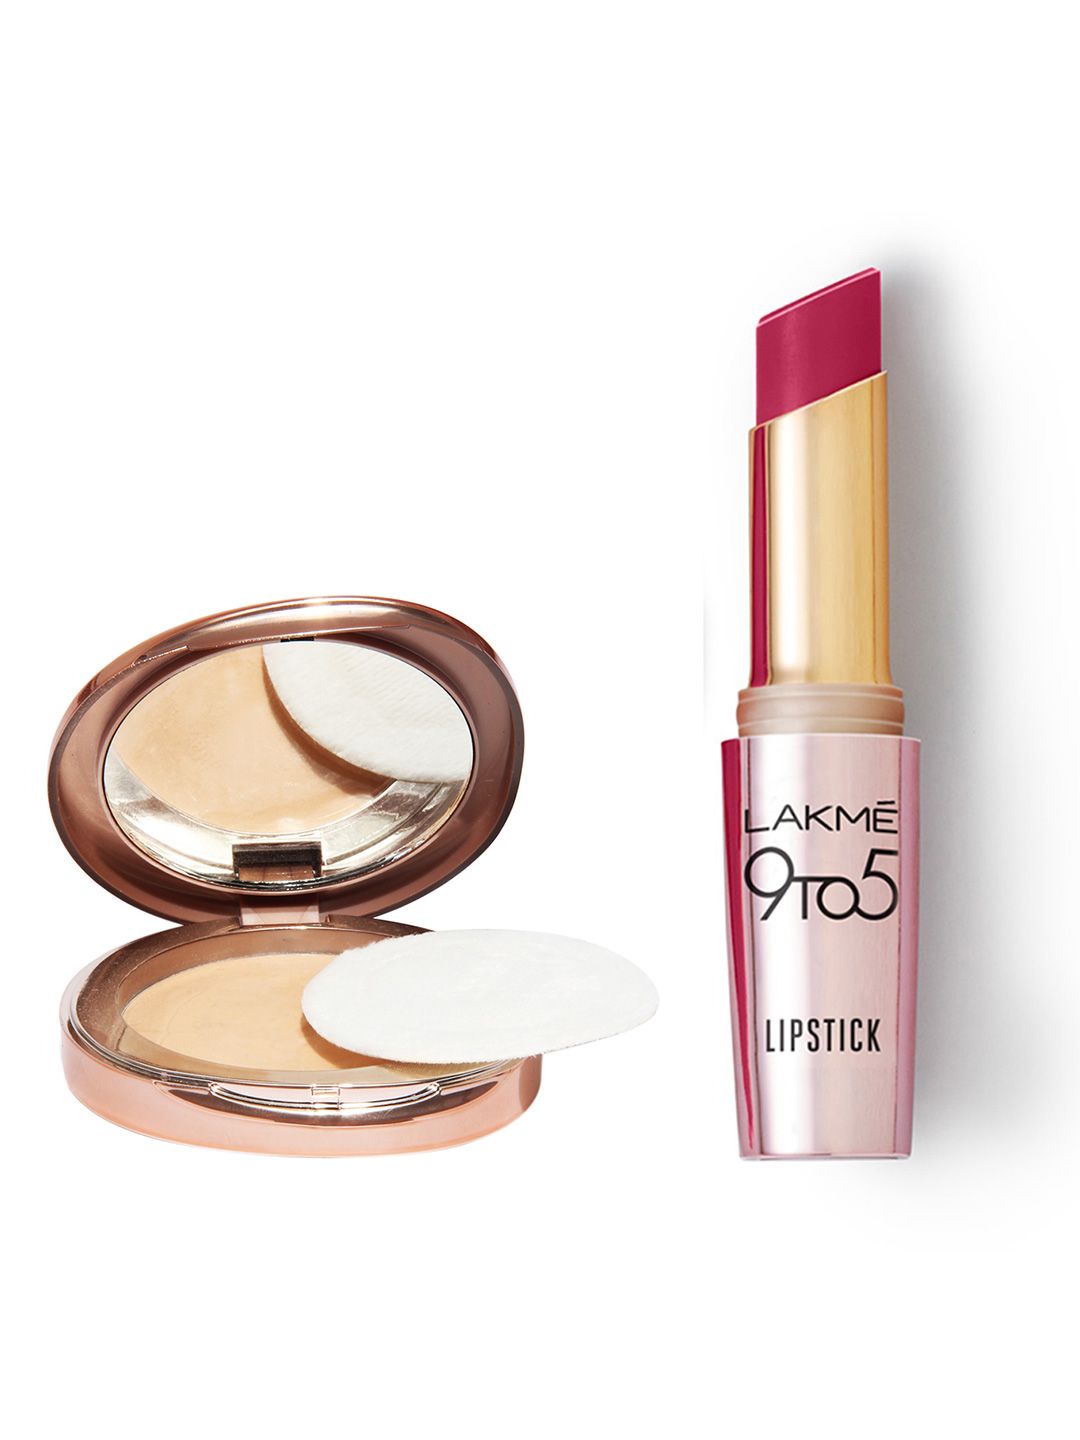 Lakme Set of 9 to 5 Primer + Matte Lipstick & Flawless Matte Complexion Compact Price in India